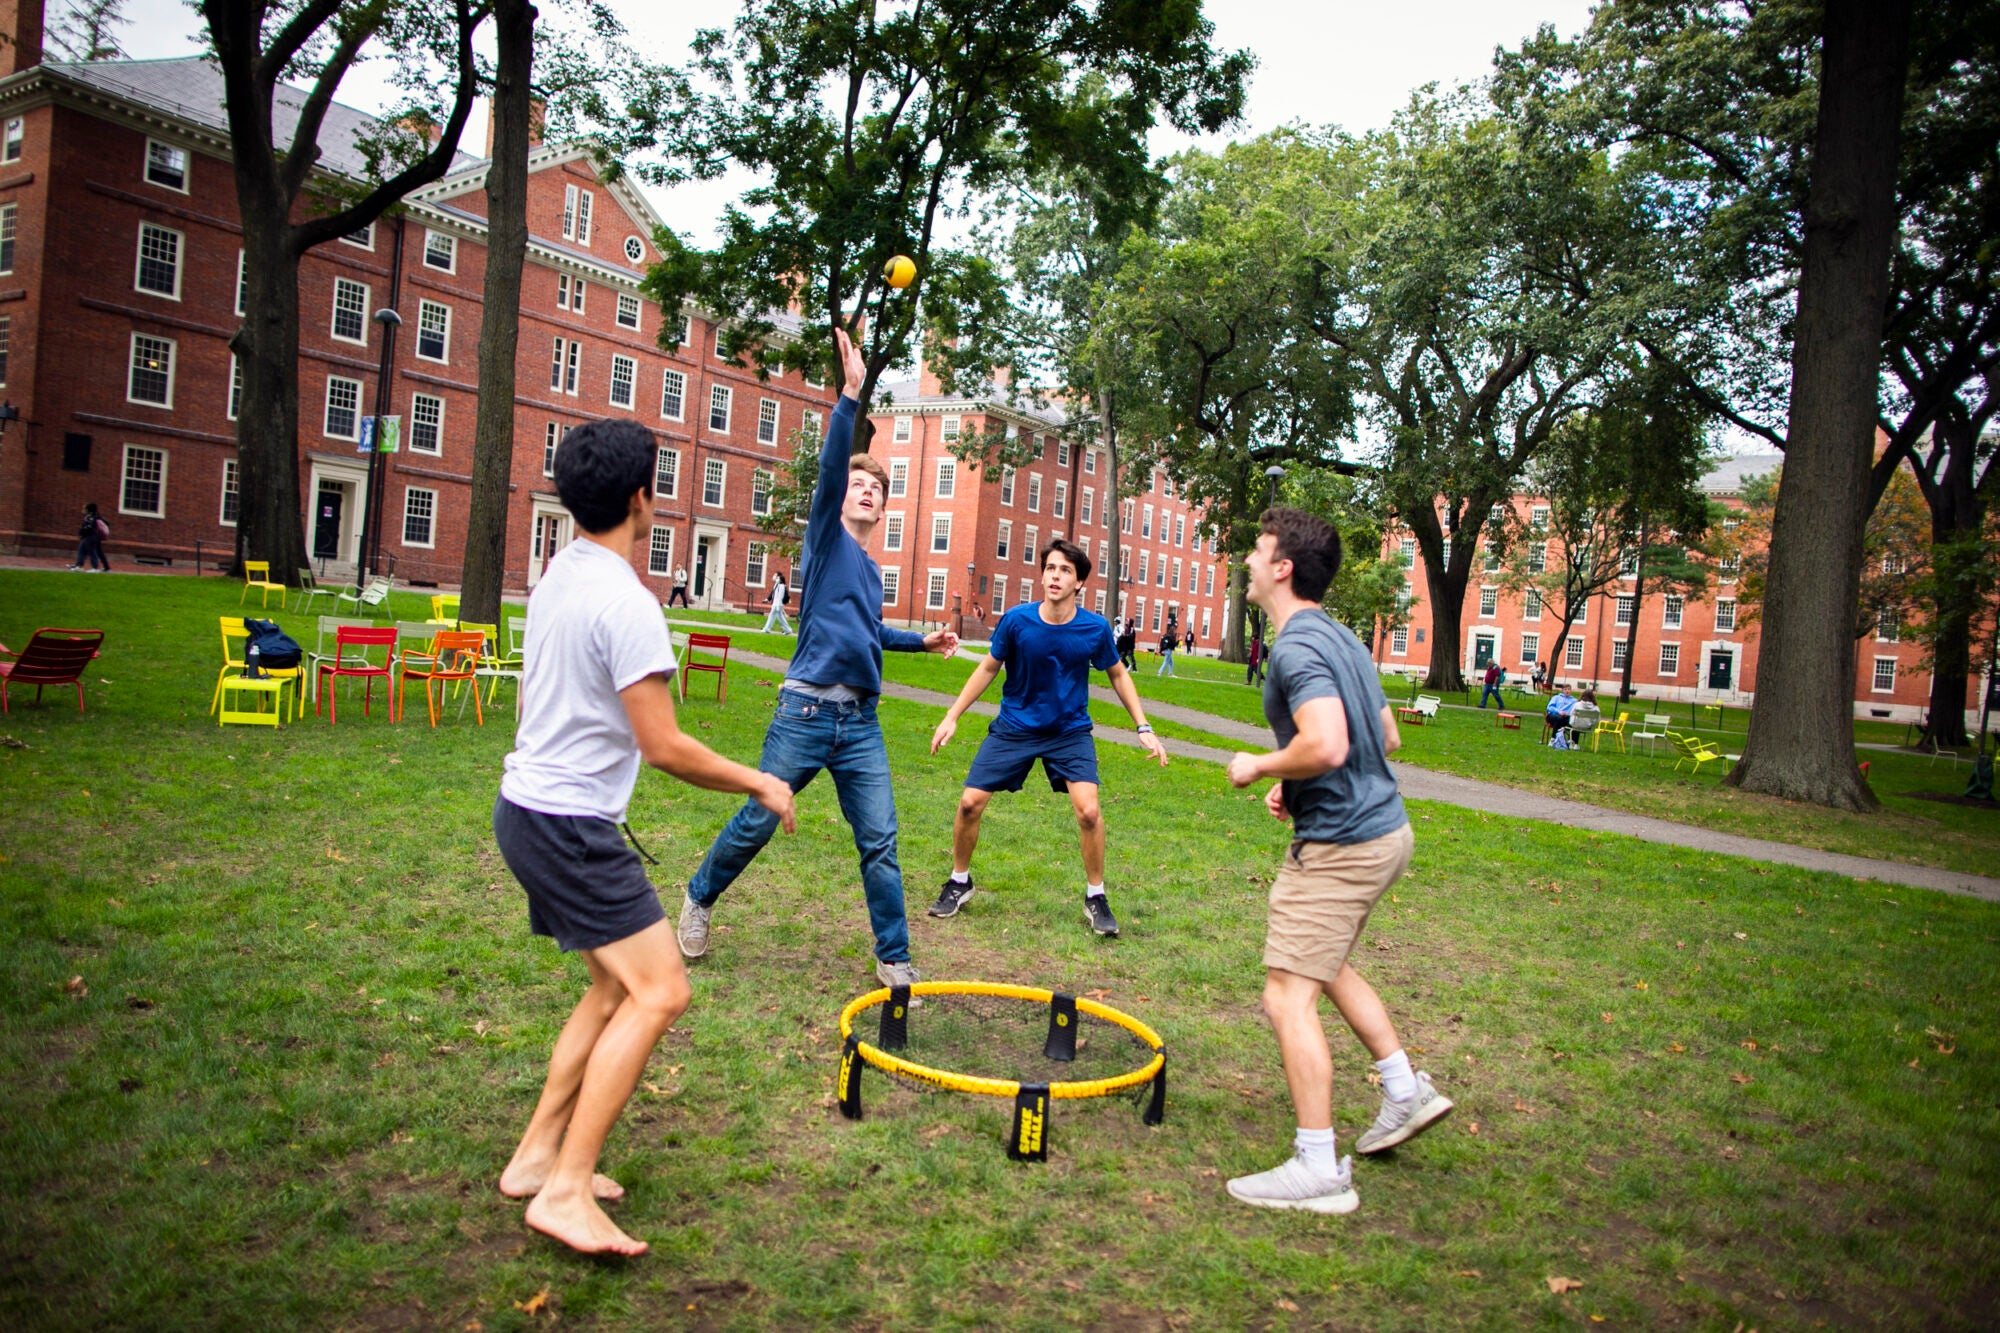 Four students play spike ball